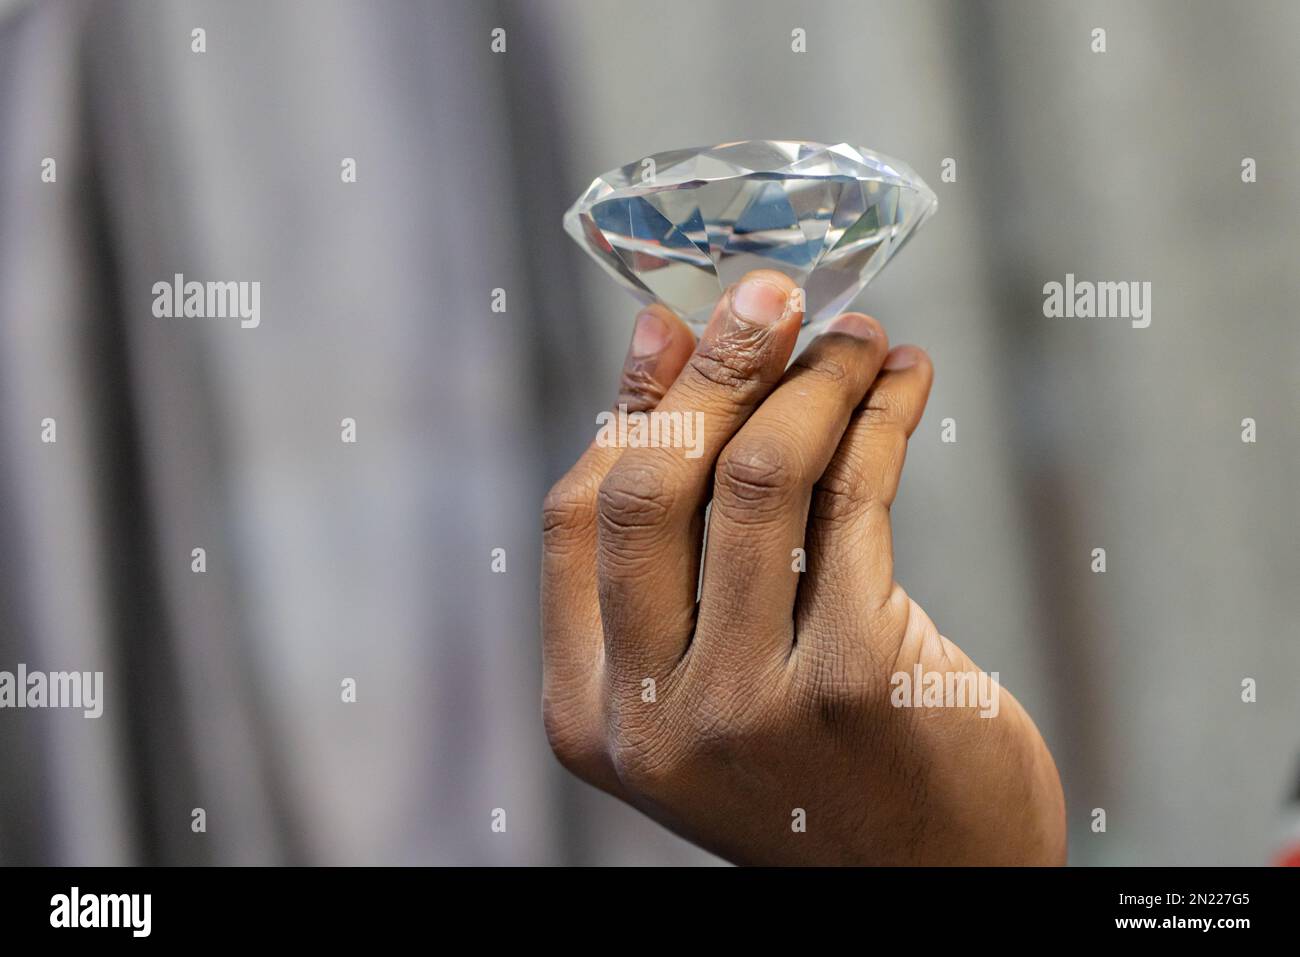 Focus on foreground of fingers holding a diamond. Stock Photo